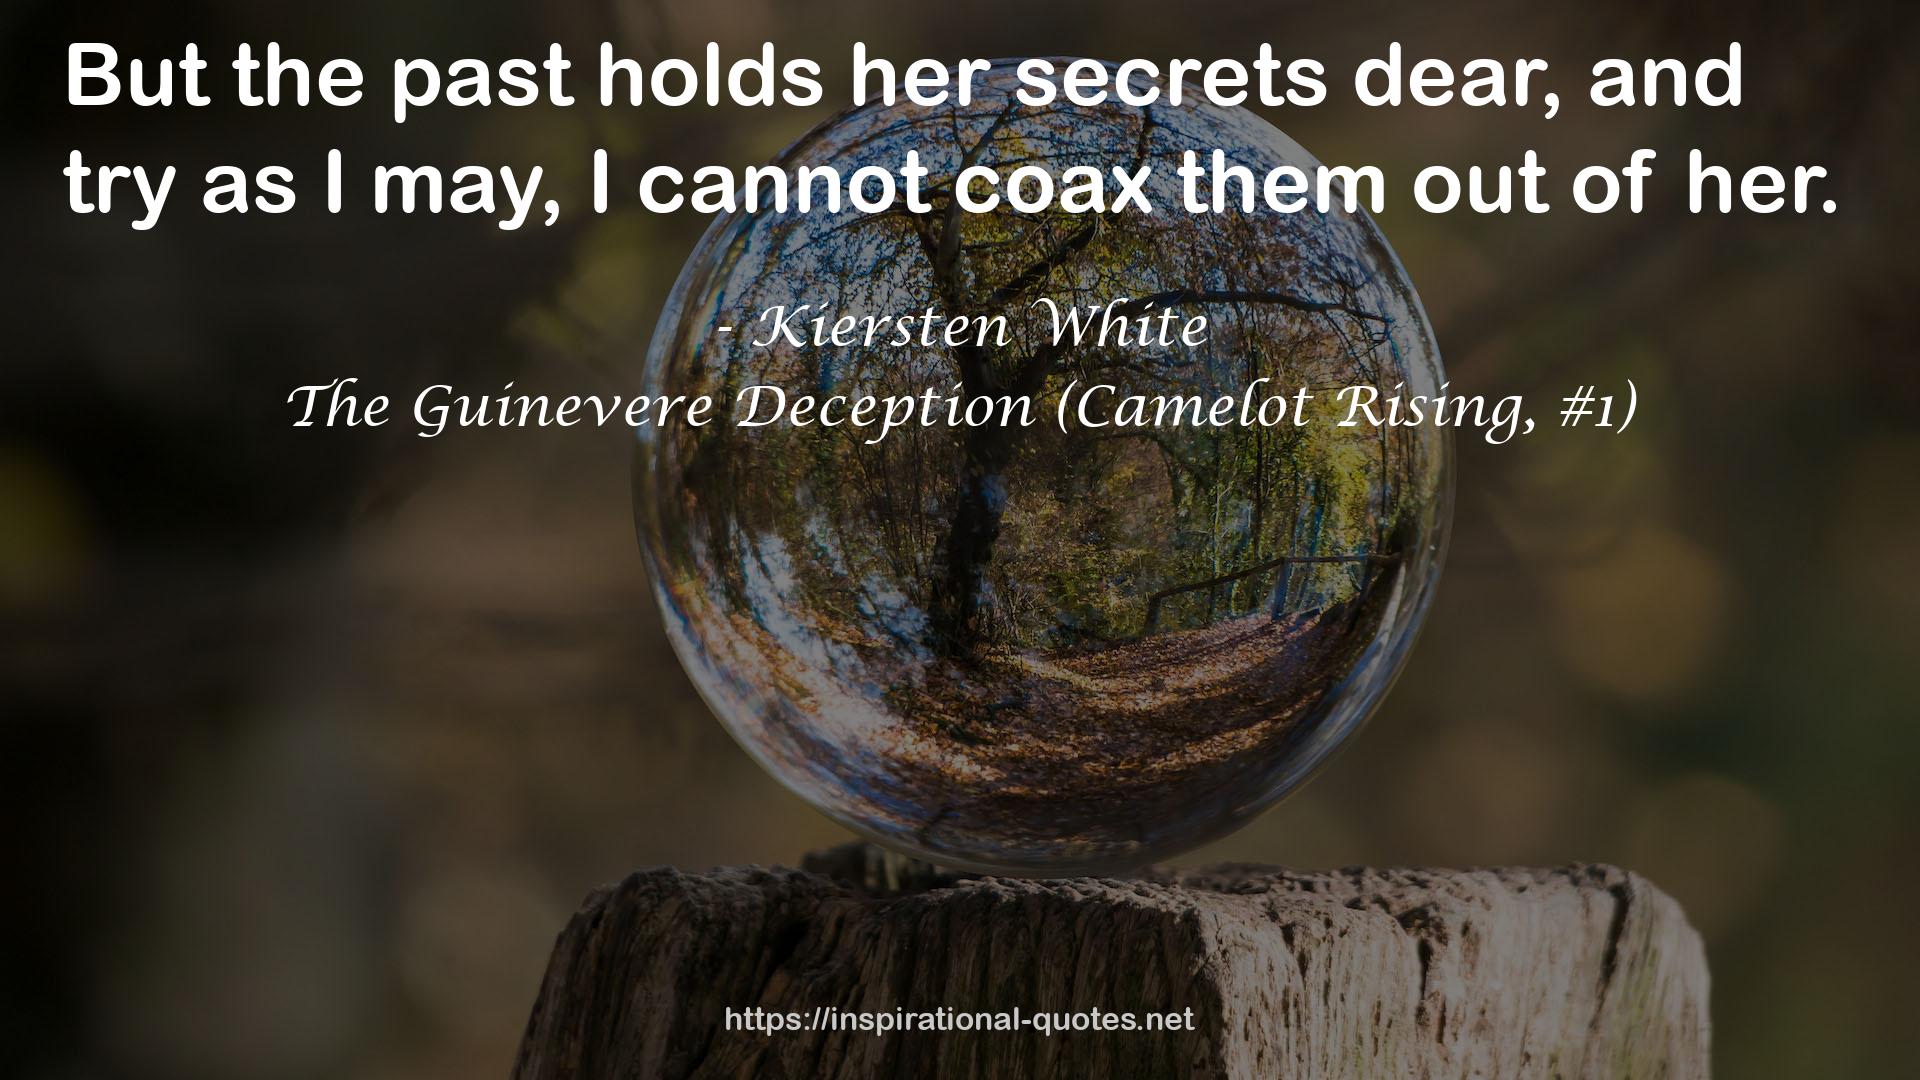 The Guinevere Deception (Camelot Rising, #1) QUOTES